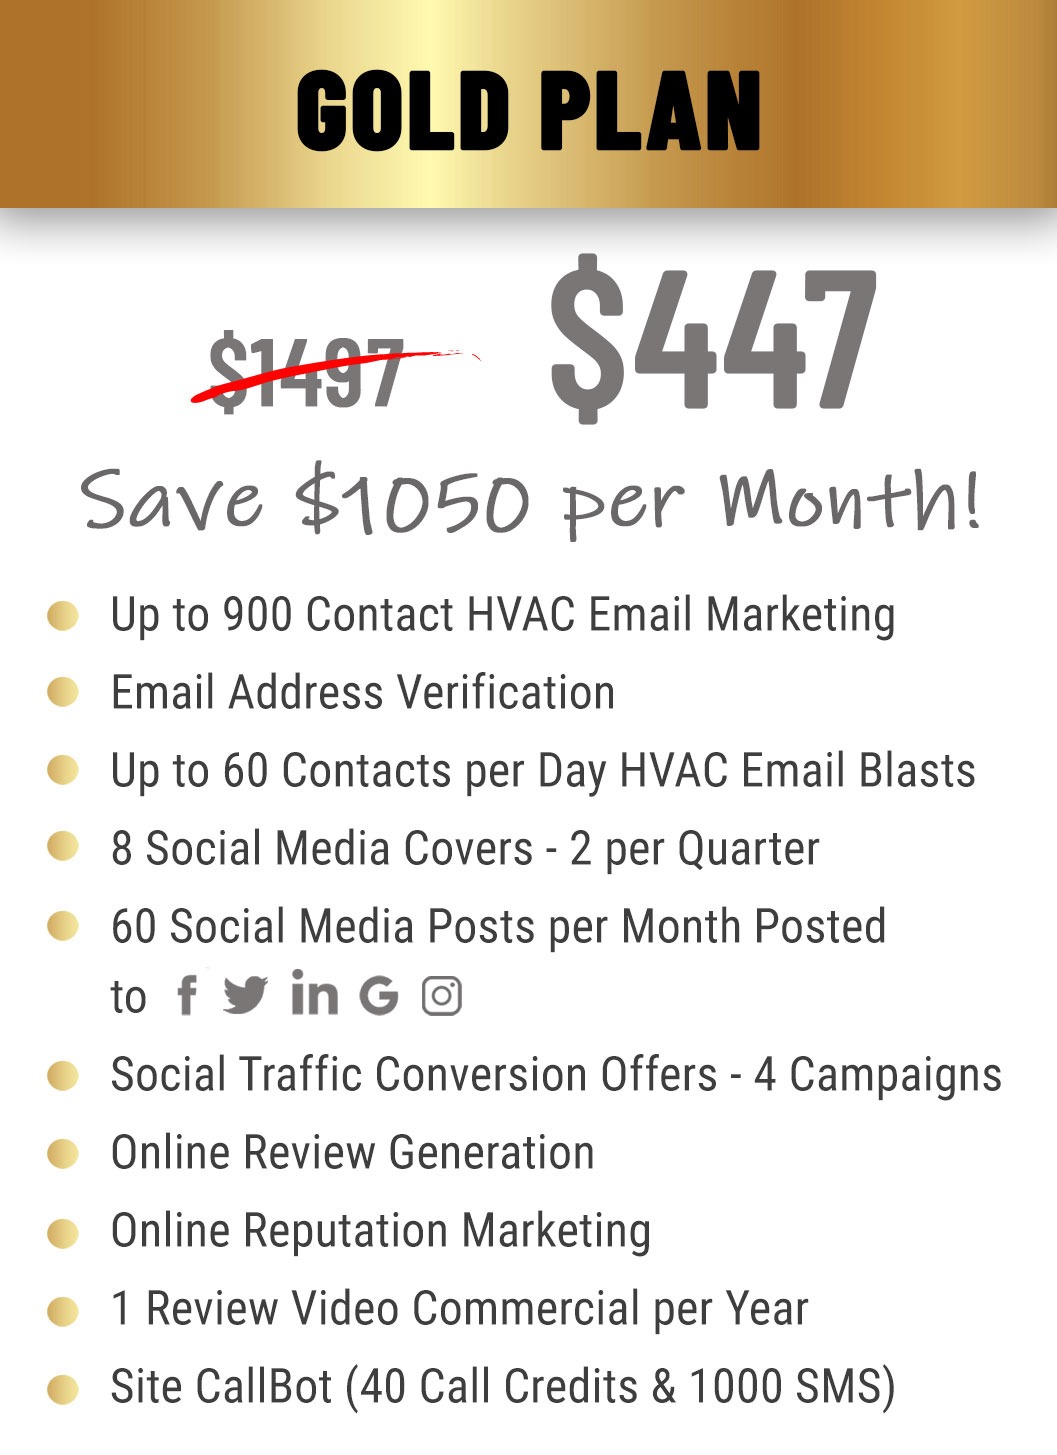 Gold Plan Pricing and Features HVAC